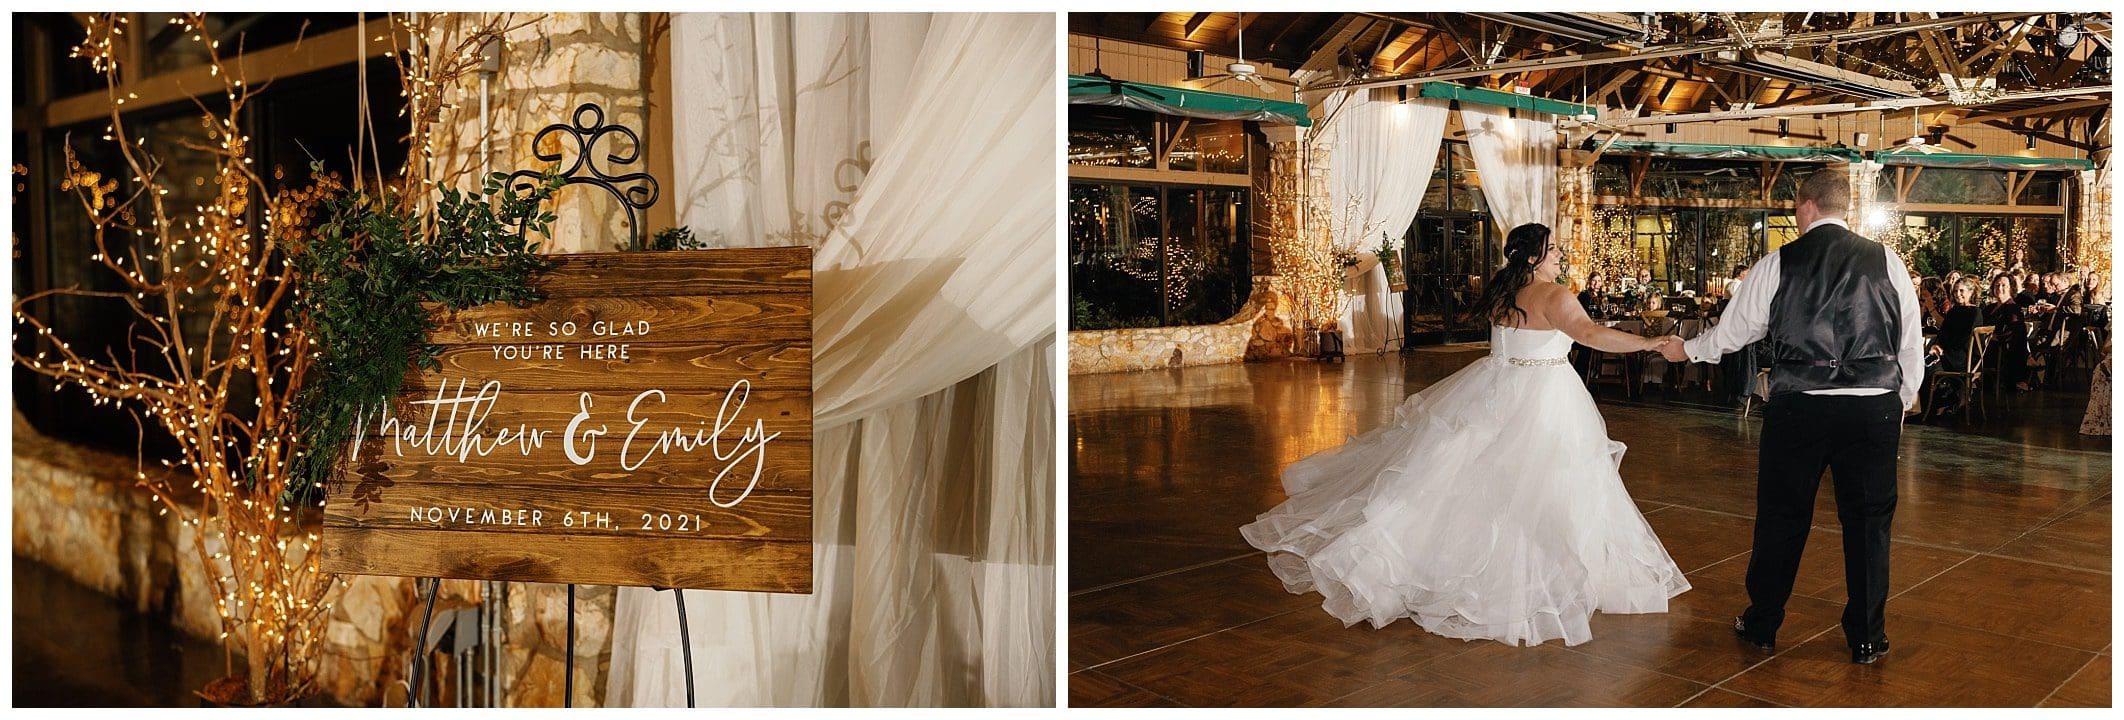 wooden sign for wedding and couple dancing for their first dance